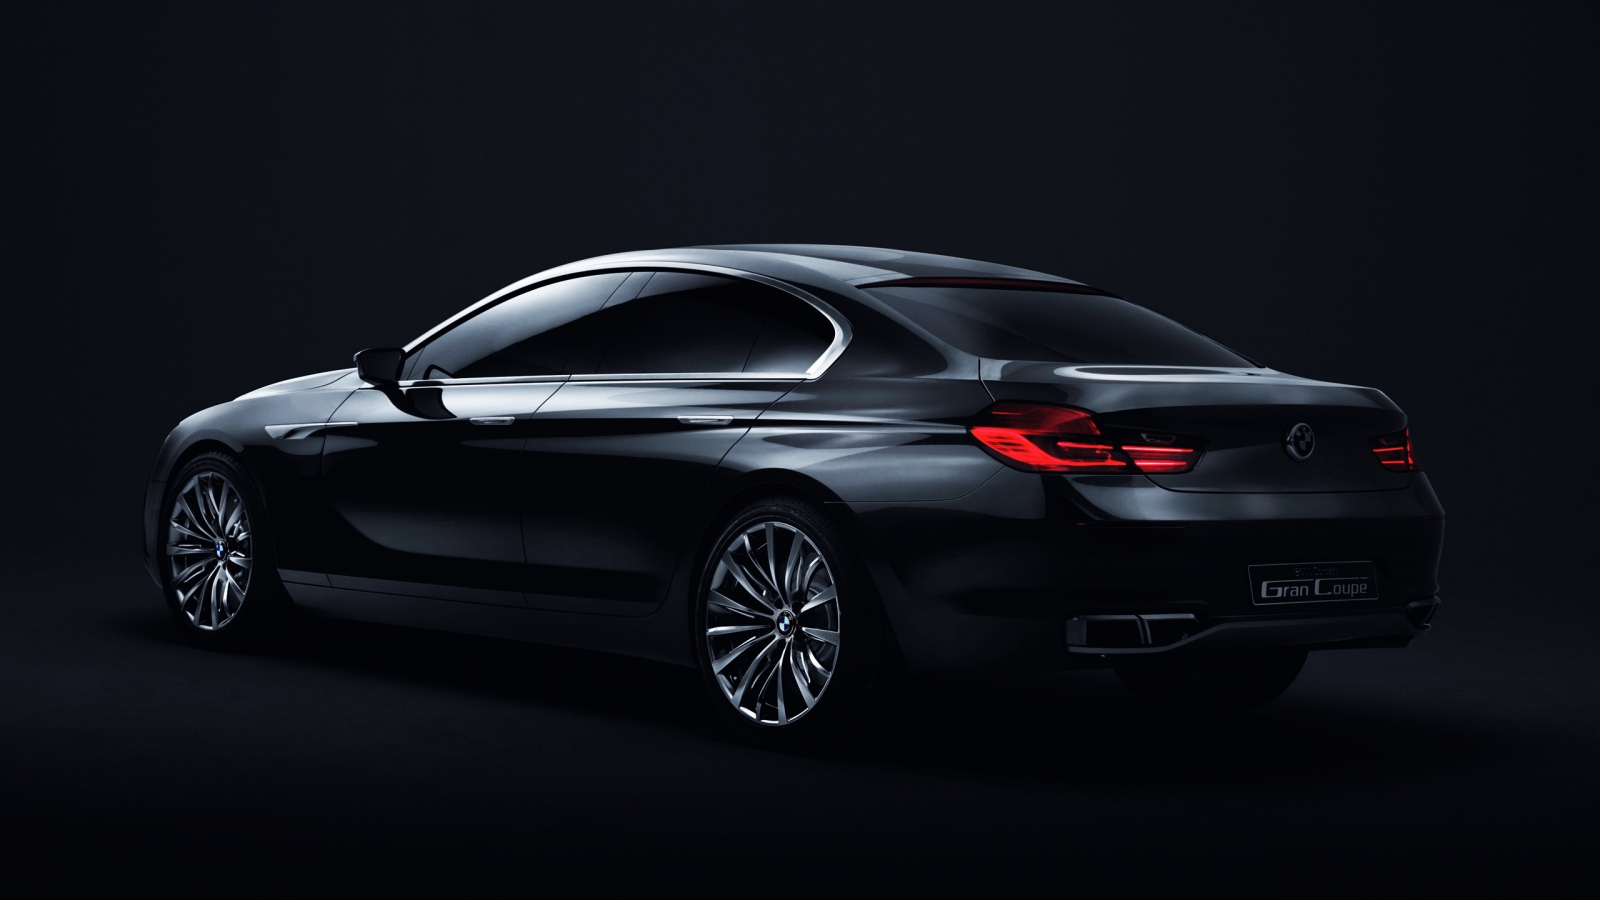 BMW Gran Coupe Rear for 1600 x 900 HDTV resolution